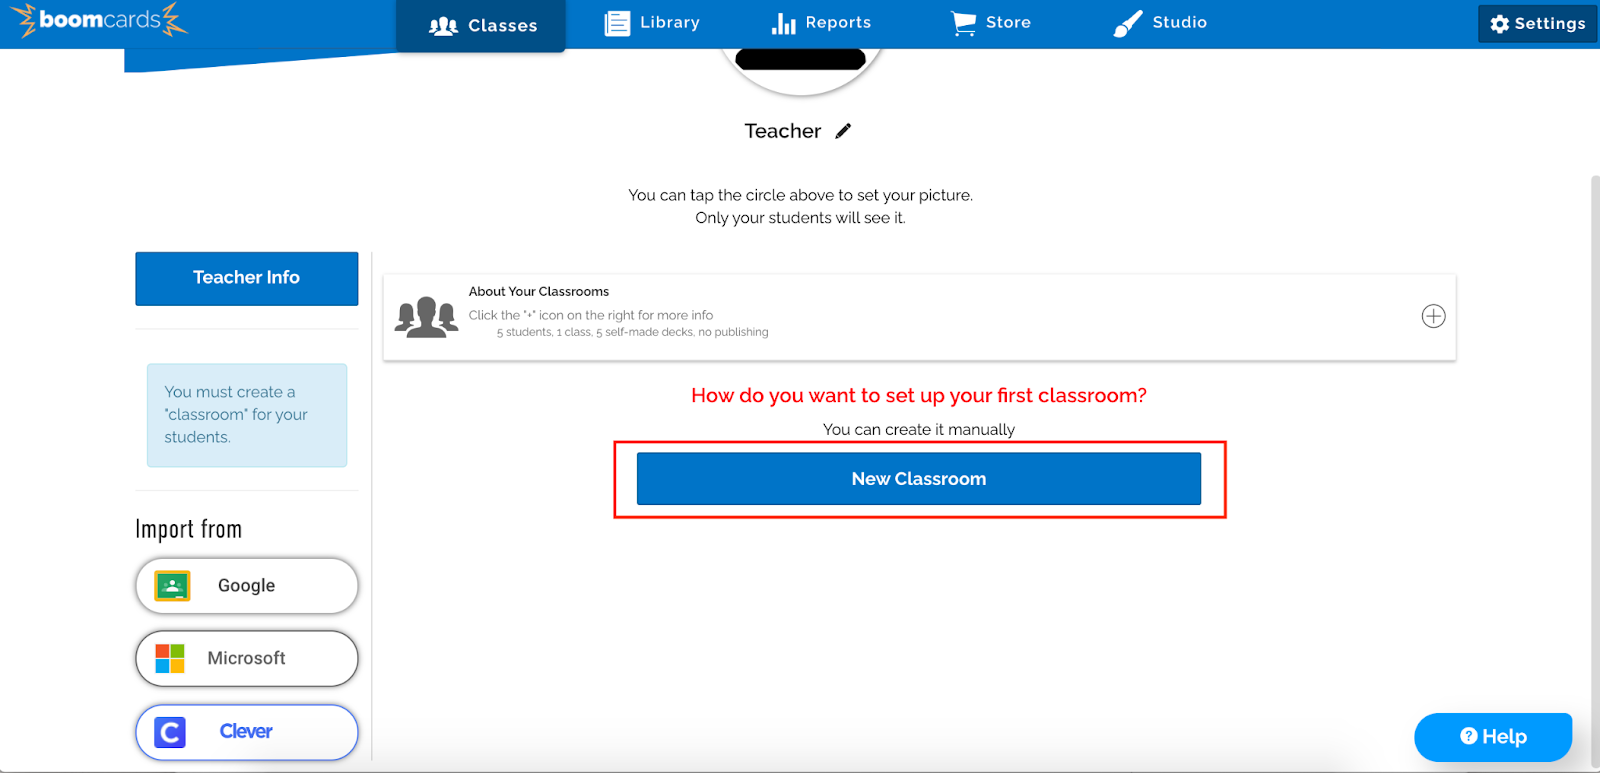 Boom Learning Classrooms Page